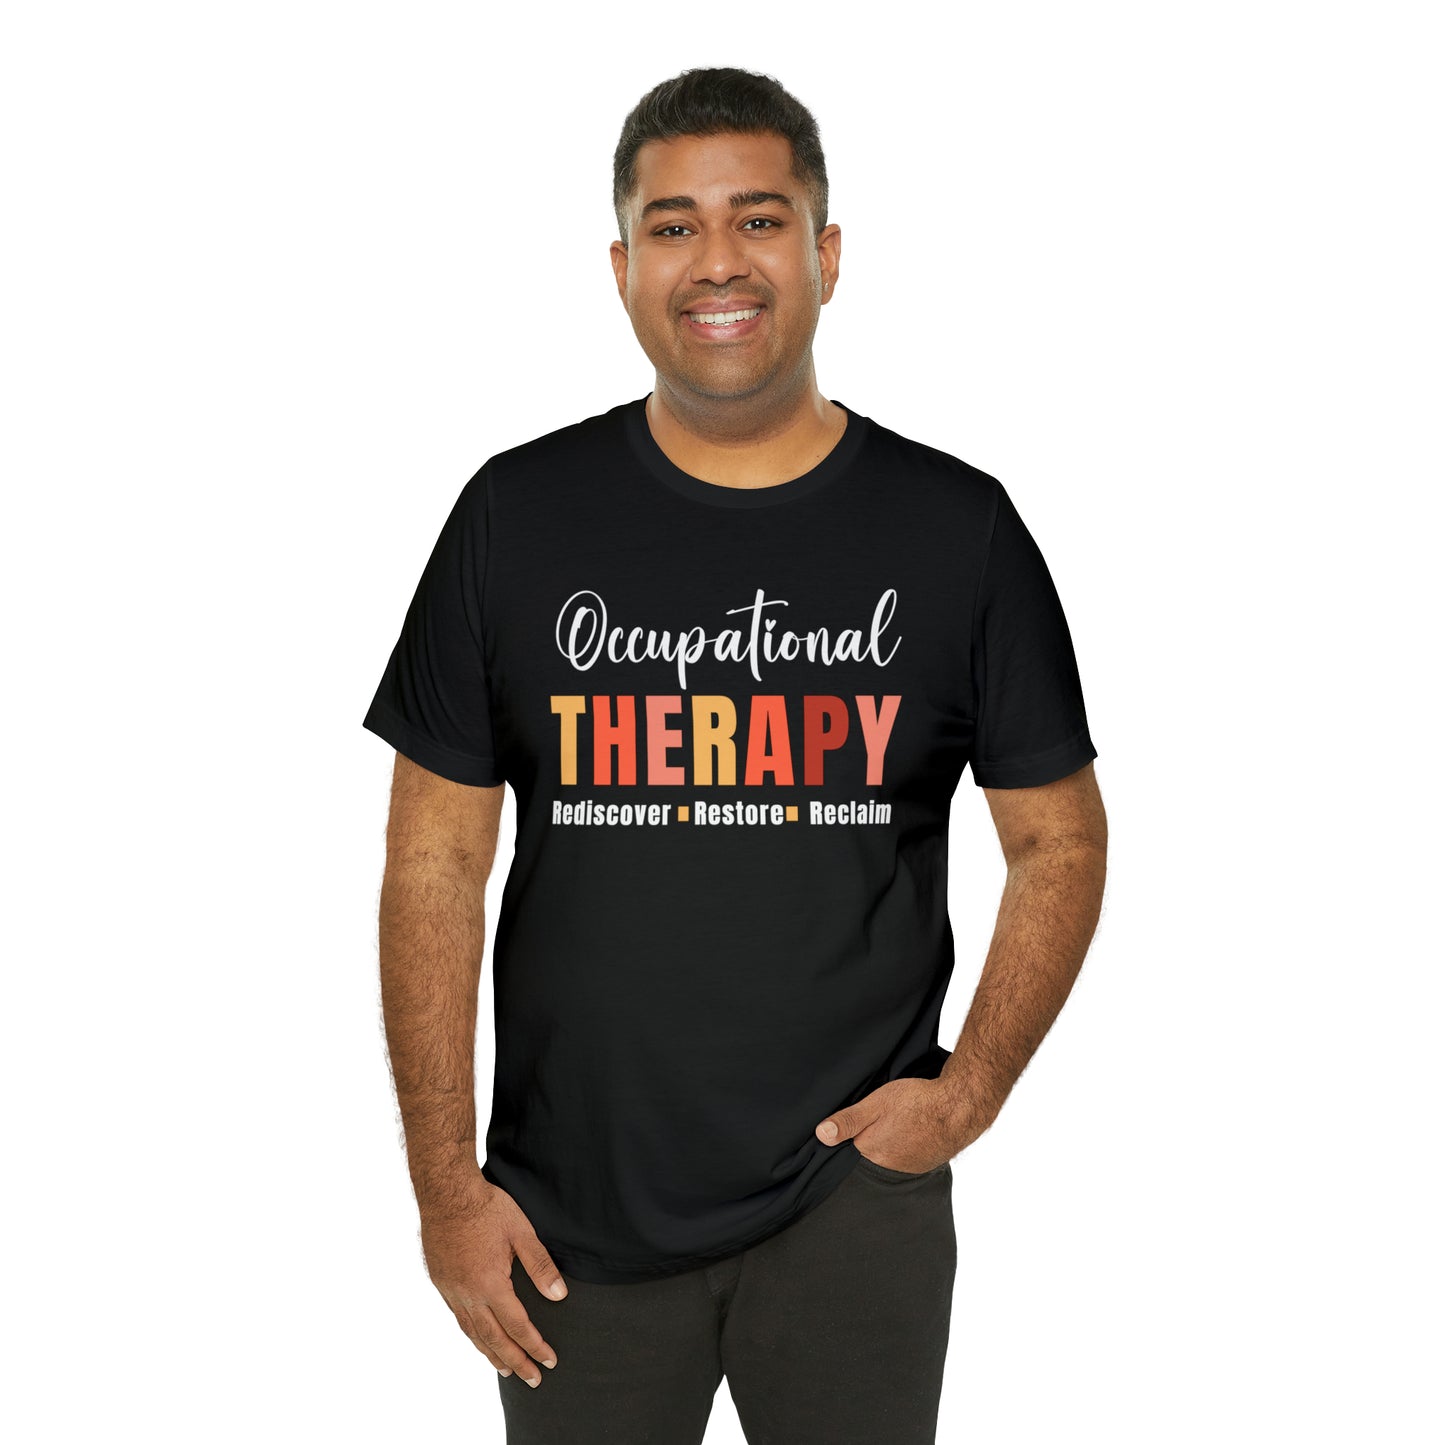 Occupational therapy shirt gift for occupational therapists therapy shirt gift men gift for women therapists therapy job gift tshirt